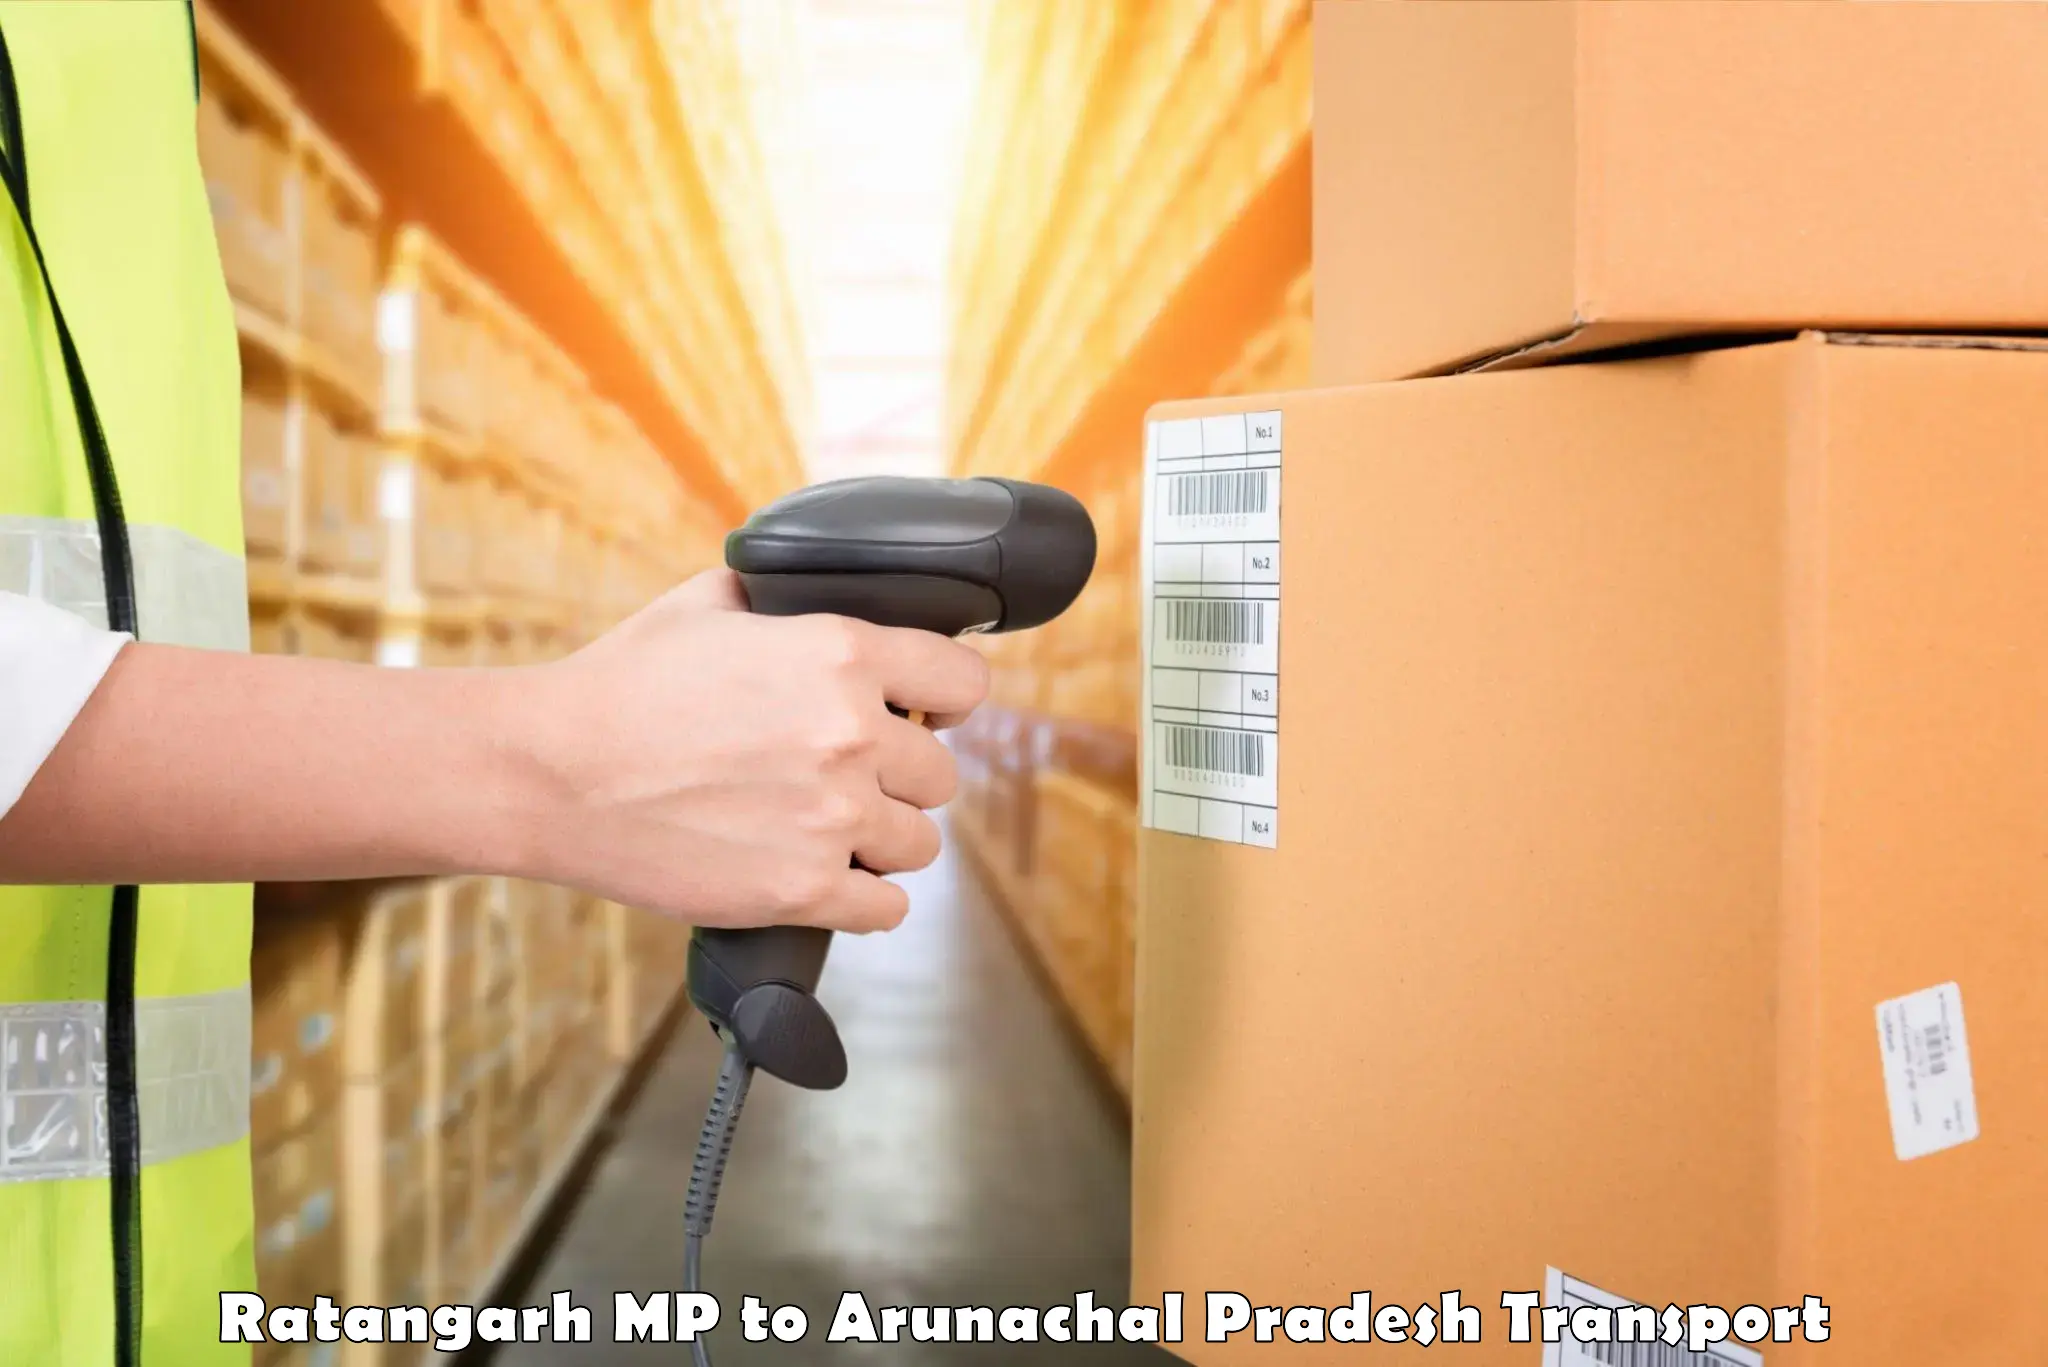 Truck transport companies in India Ratangarh MP to Yingkiong